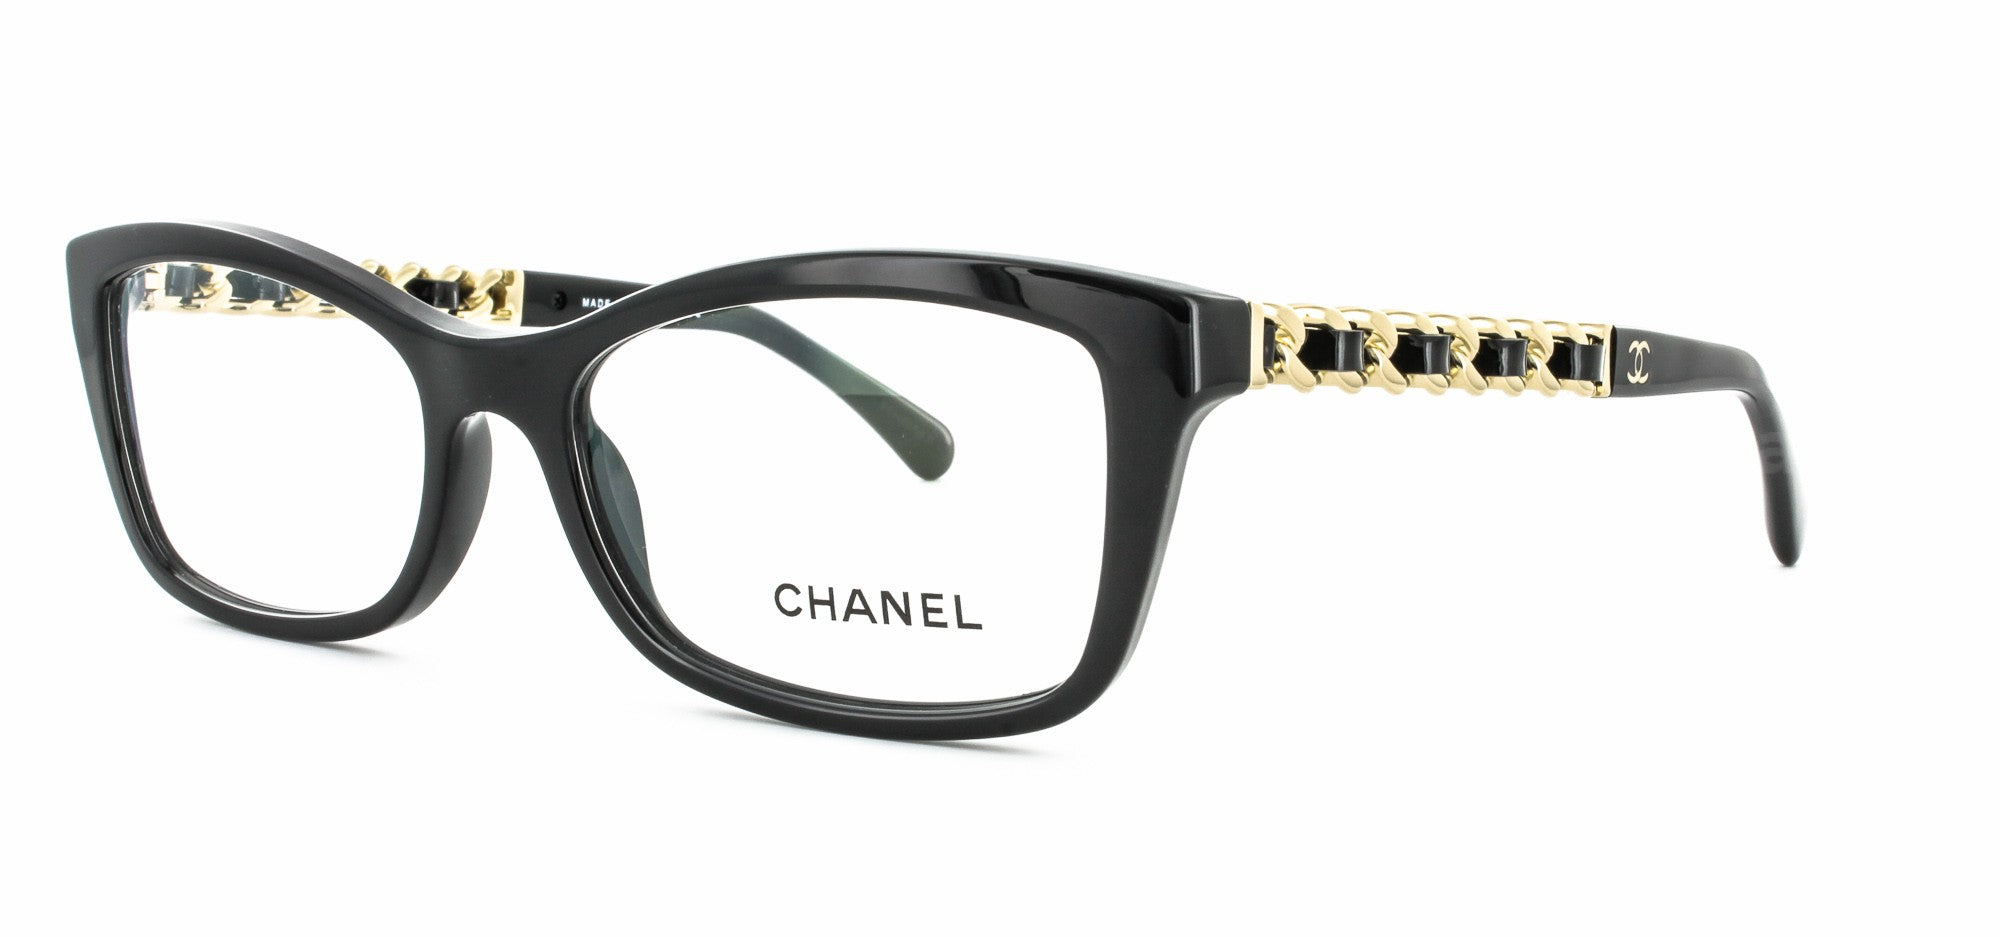 15 Best Chanel Sunglasses For A Classic French Aesthetic